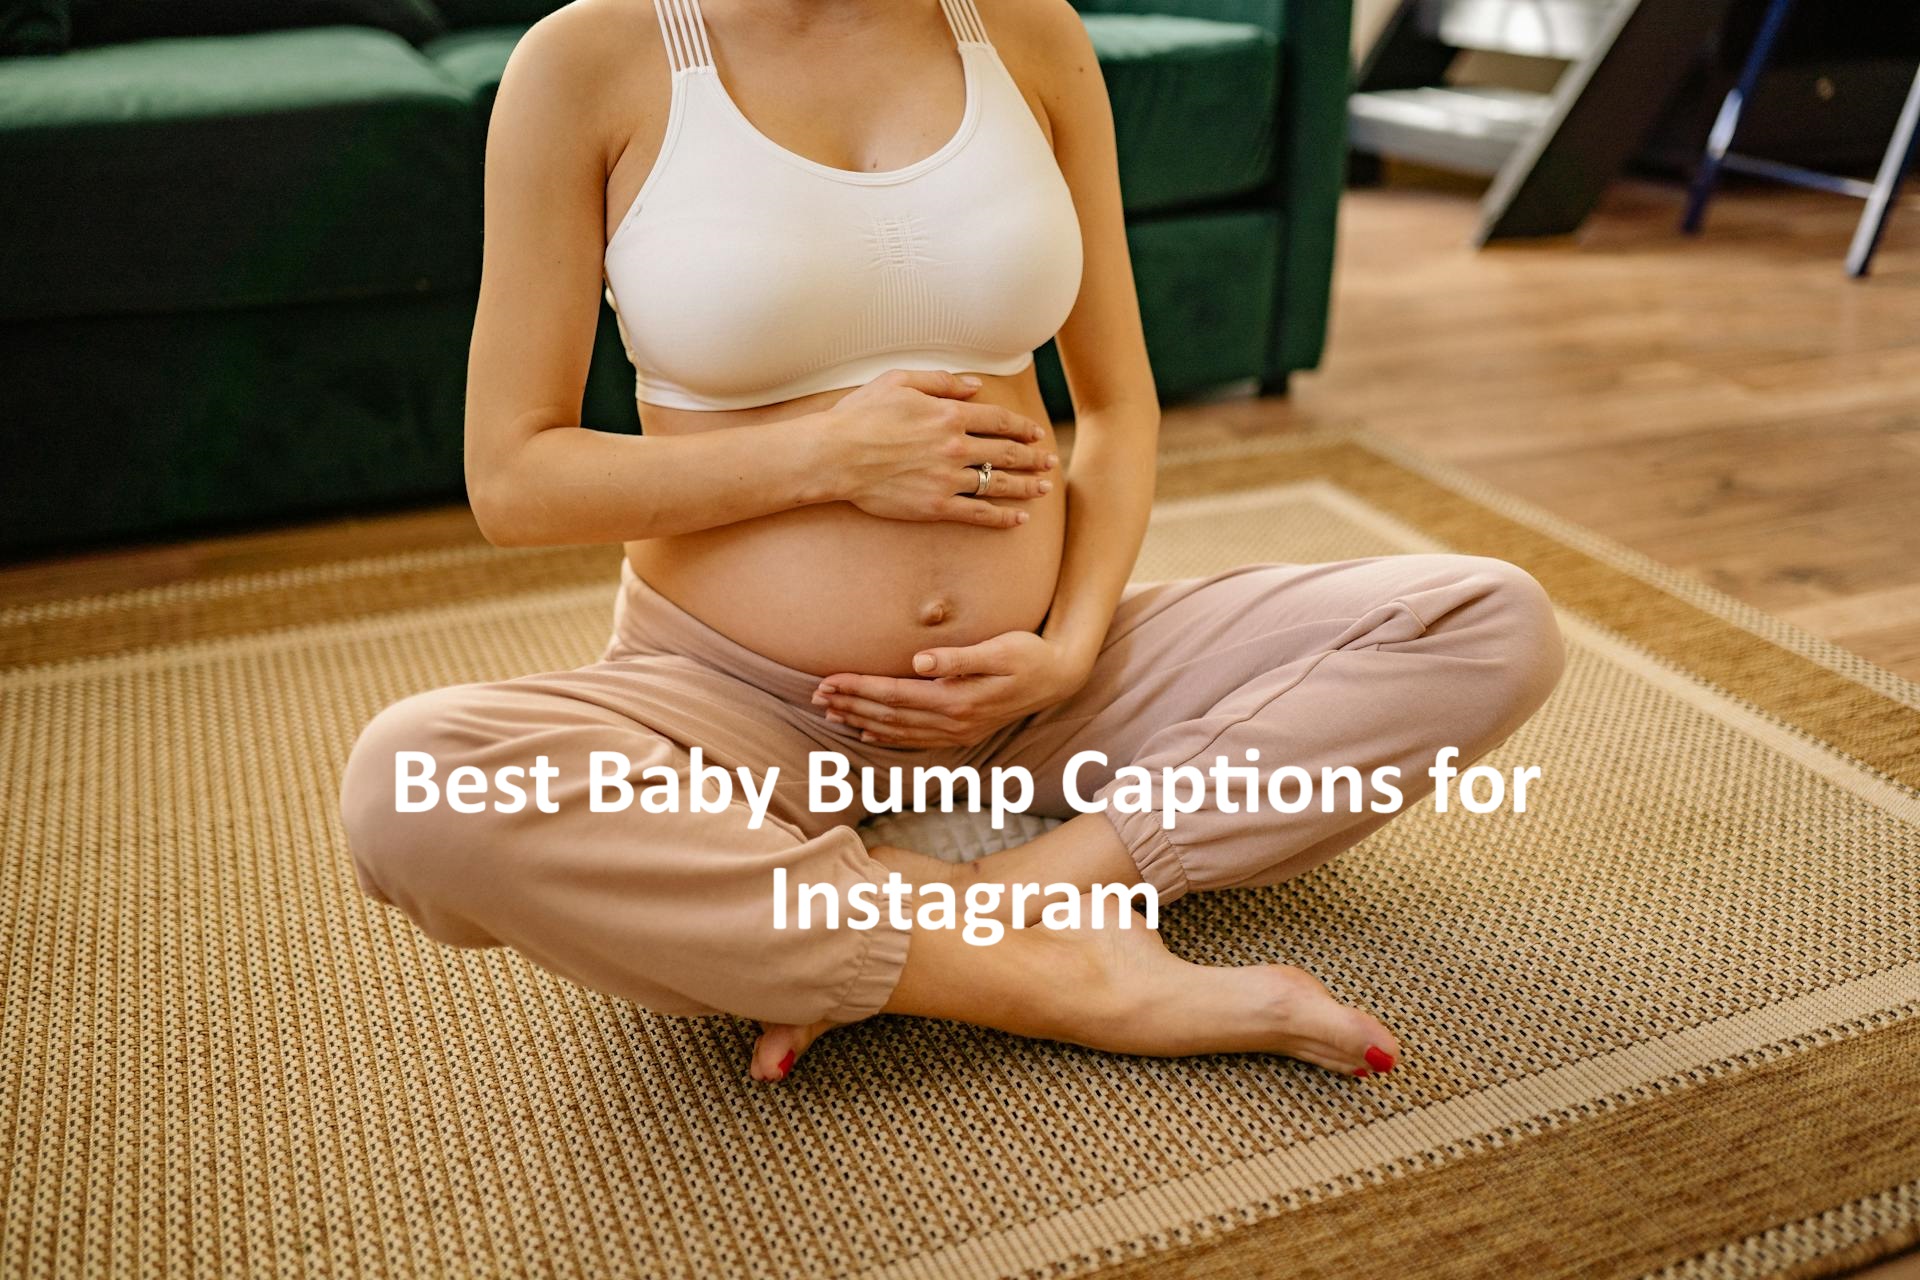 Baby Bump Captions for Instagram